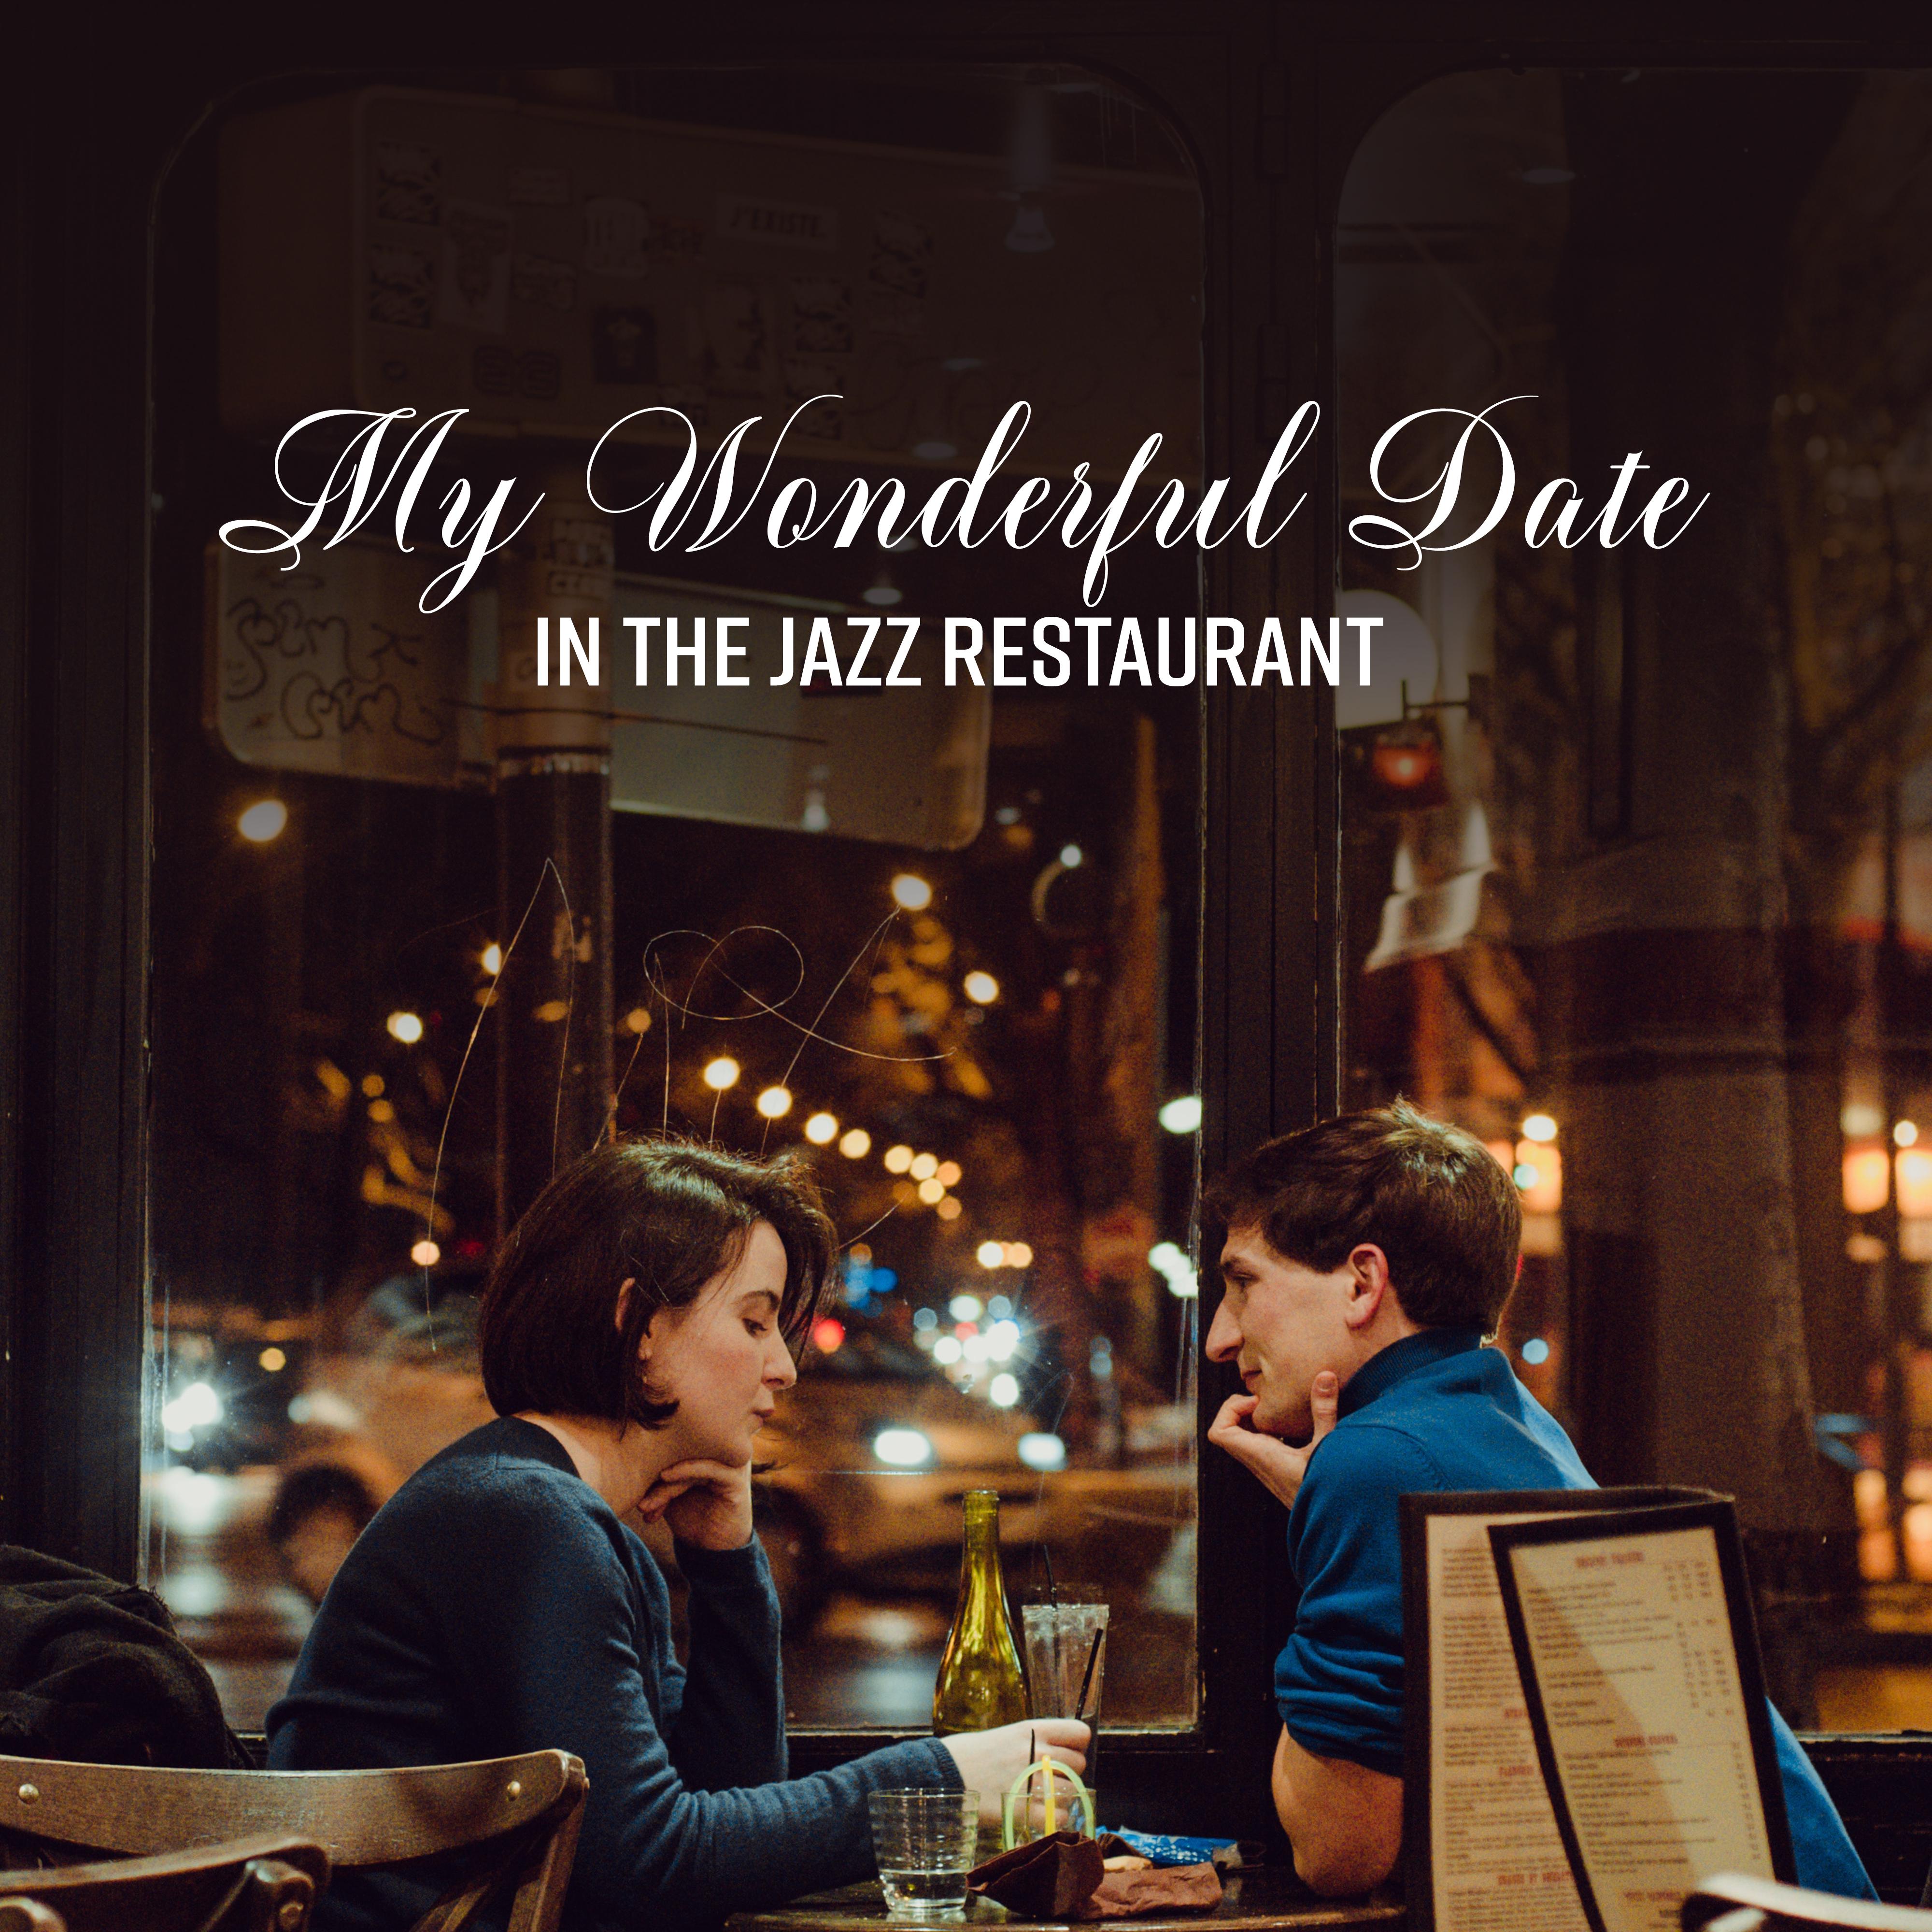 My Wonderful Date in the Jazz Restaurant: Smooth Jazz Romantic Compilation for Tasty Dinner for Two, Date with Your Love, Wedding Aniversary, Perfect Background for Restaurant or Cafe